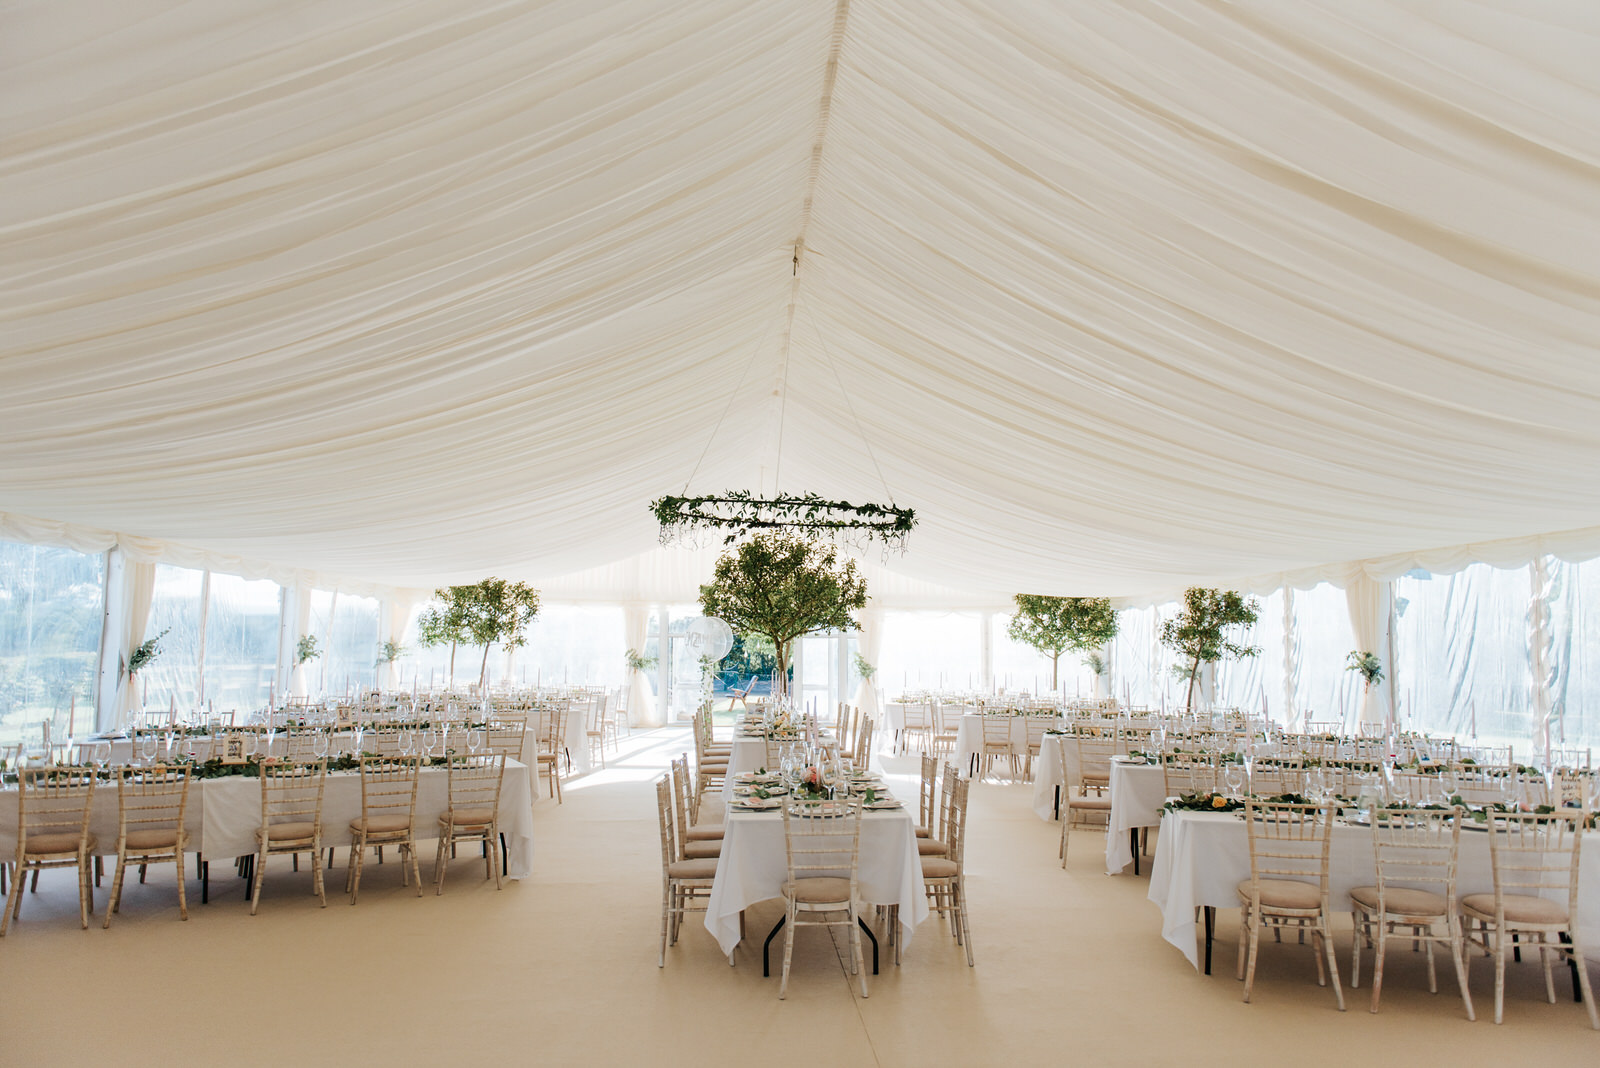 Beautiful white decor inside tree-lined garden marquee